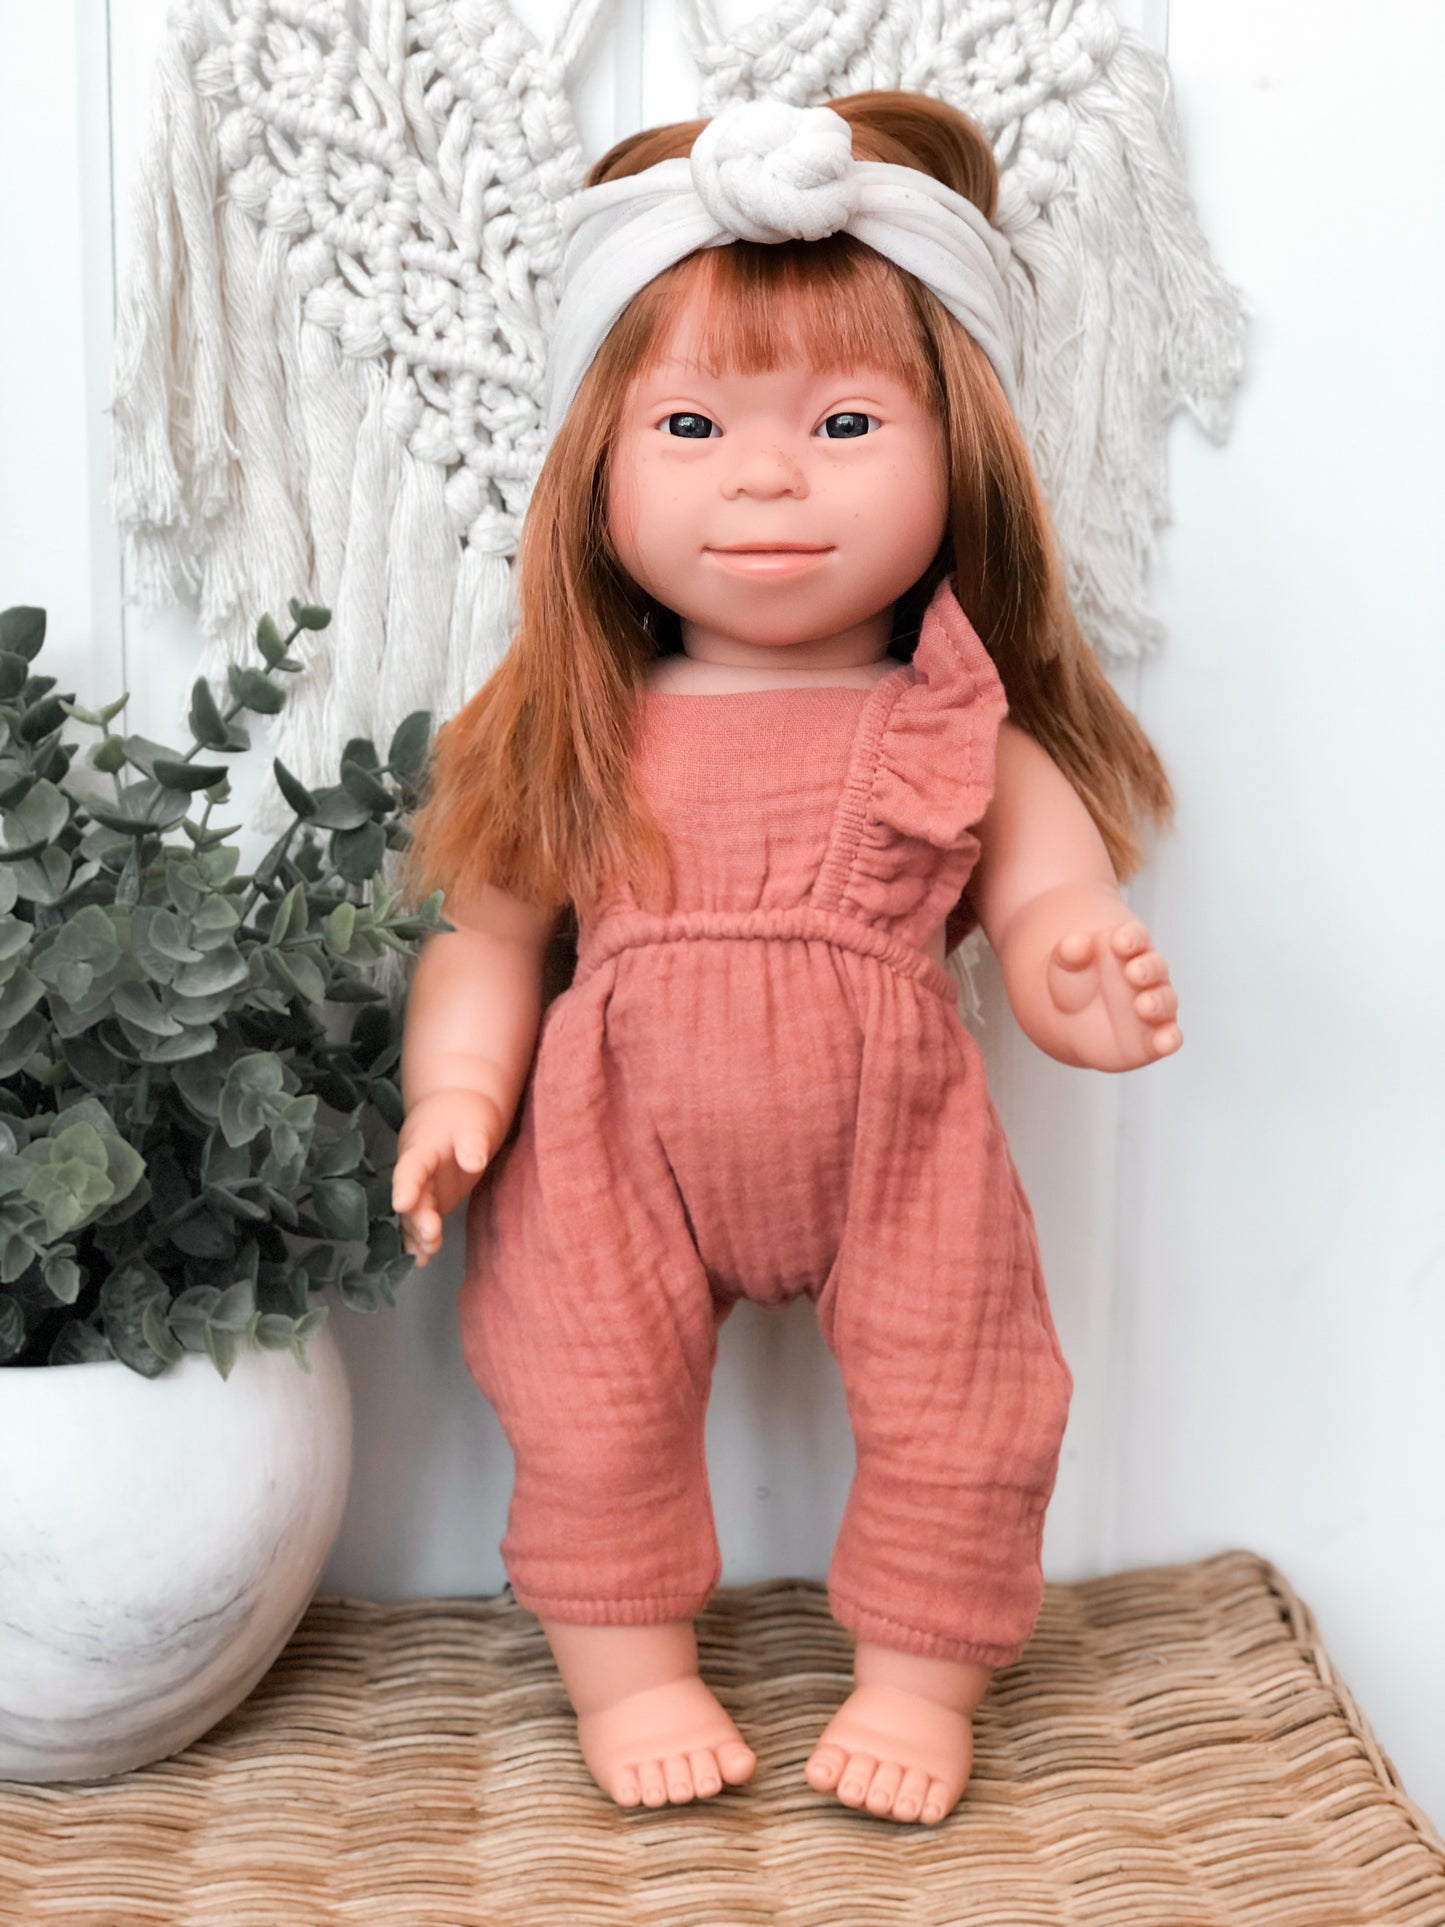 Eleanor - Girl Doll with Down Syndrome